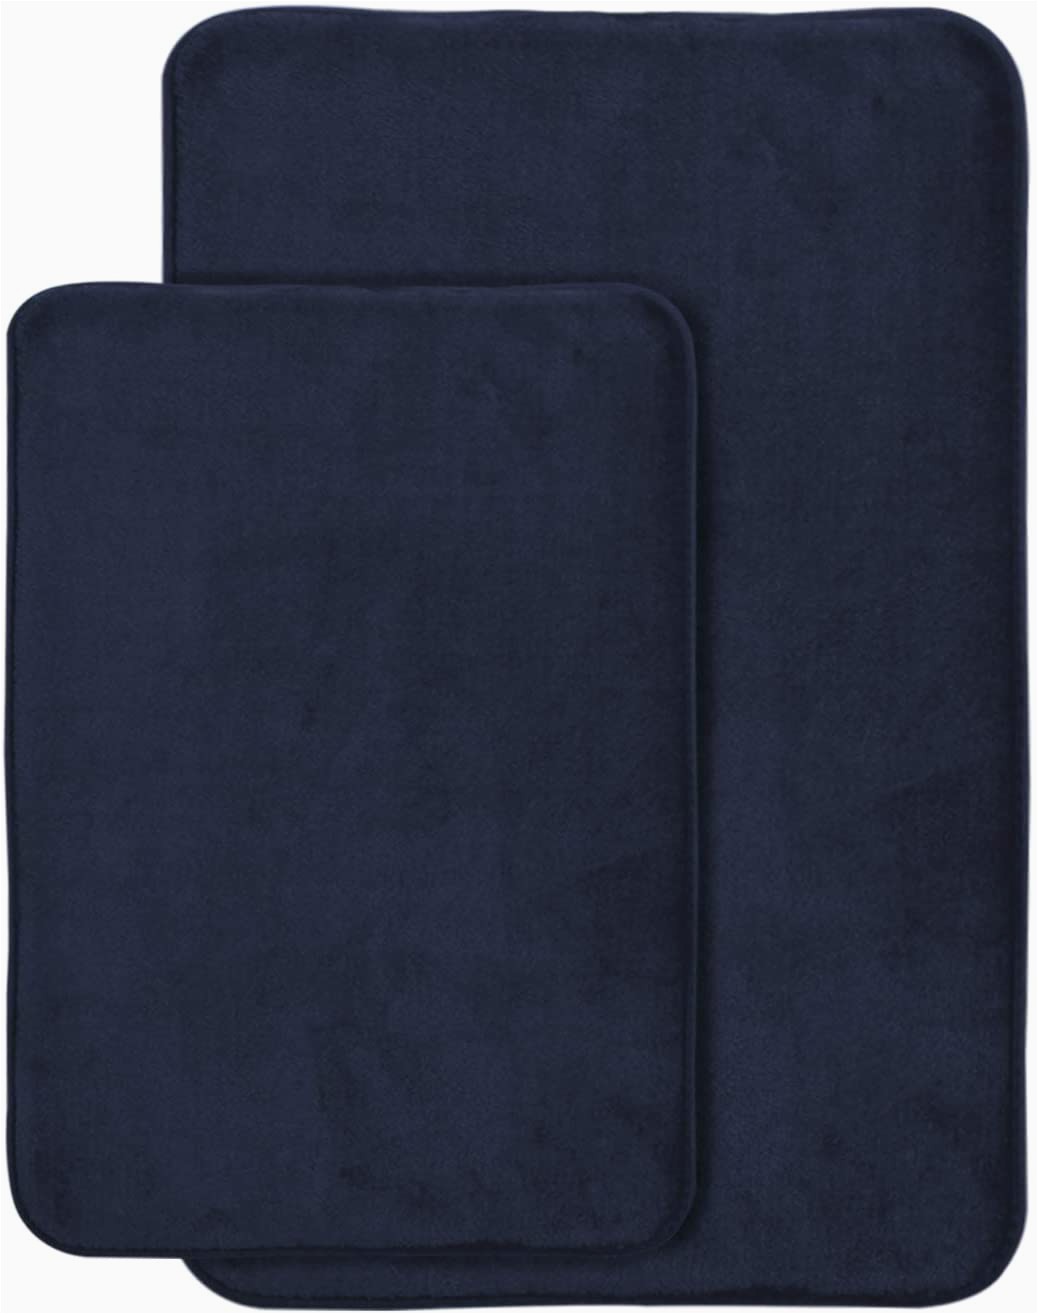 Large Memory Foam Bath Rug Aoacreations Non Slip Memory Foam Bathroom Bath Mat Rug 2 Piece Set Includes 1 20" X 32" and 1 Small 17" X 24" Navy Blue